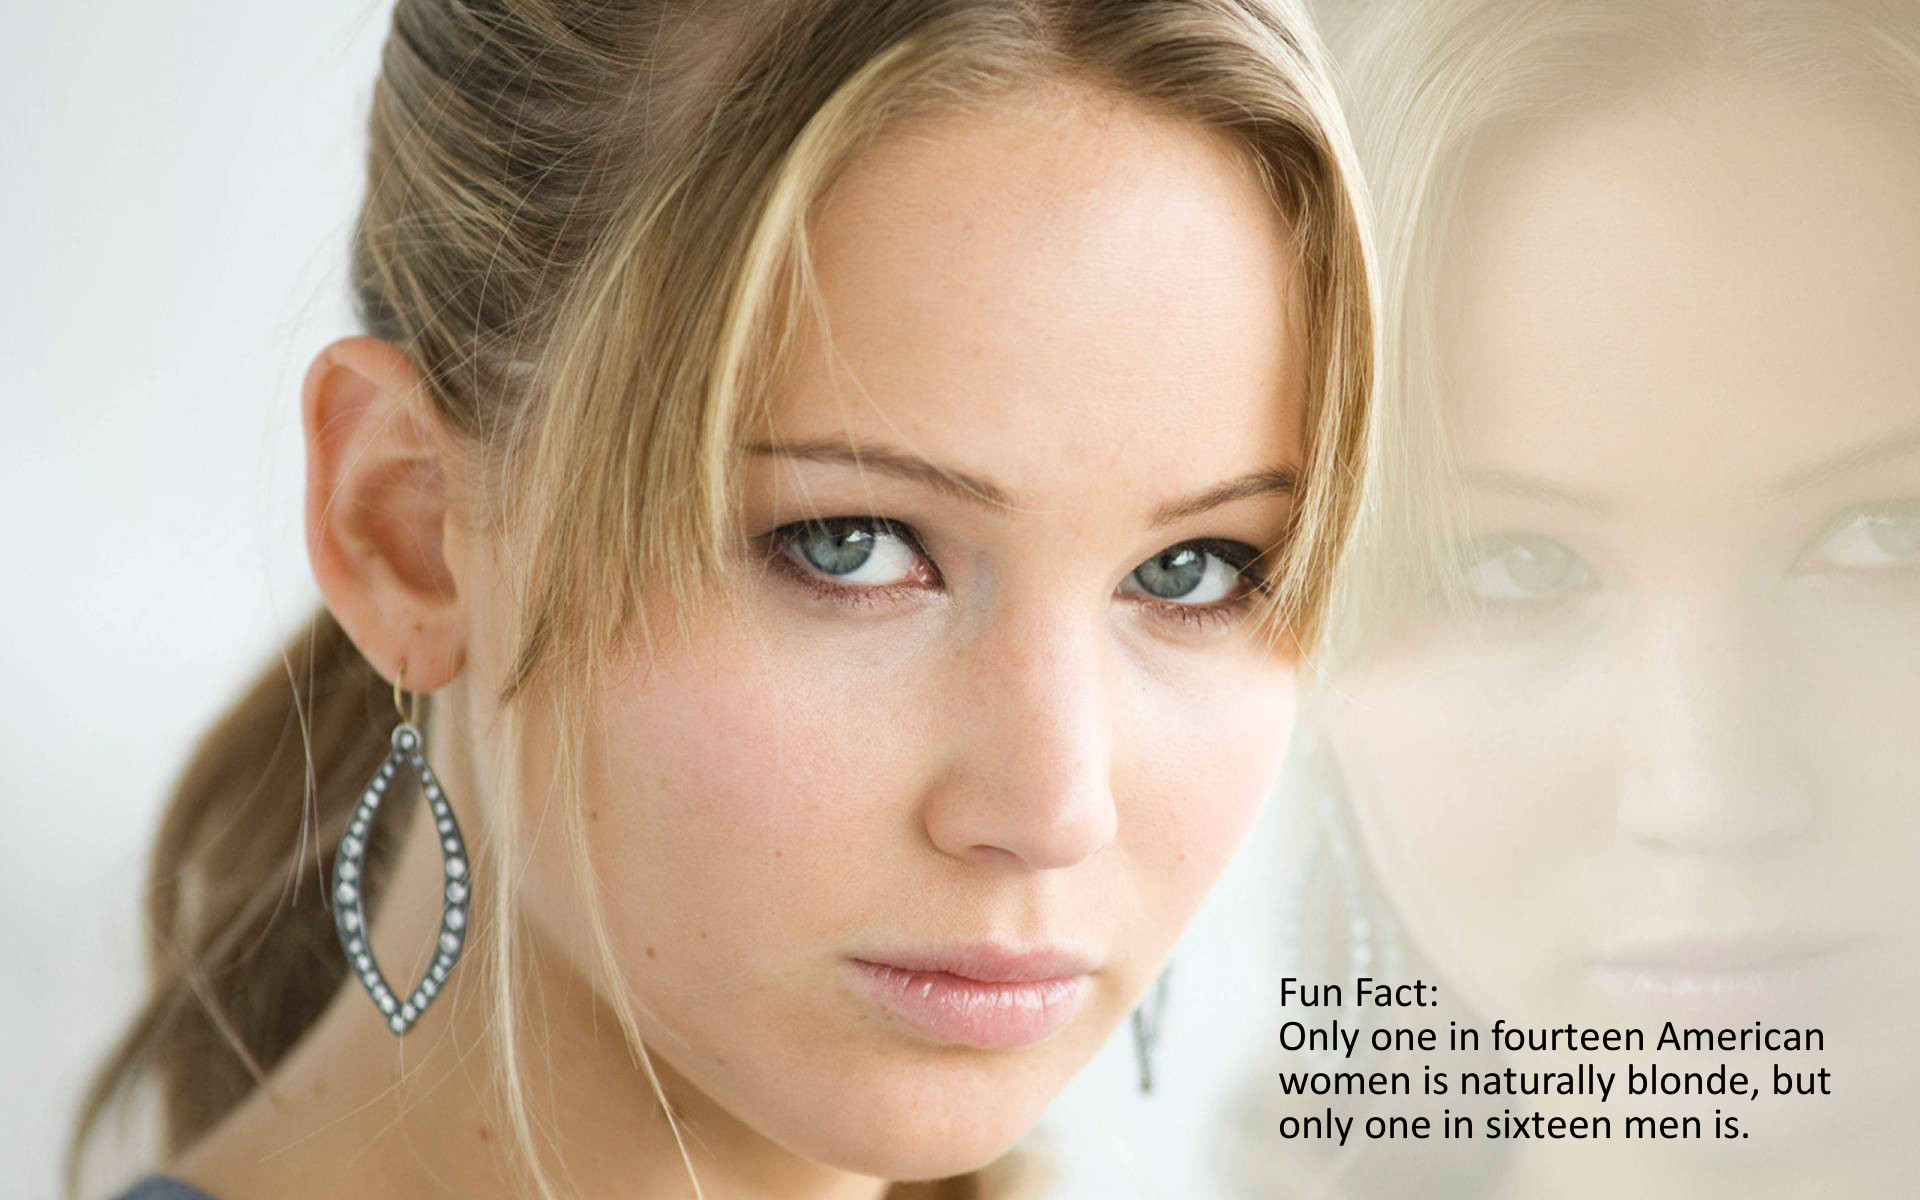 jennifer lawrence - Fun Fact Only one in fourteen American women is naturally blonde, but only one in sixteen men is.